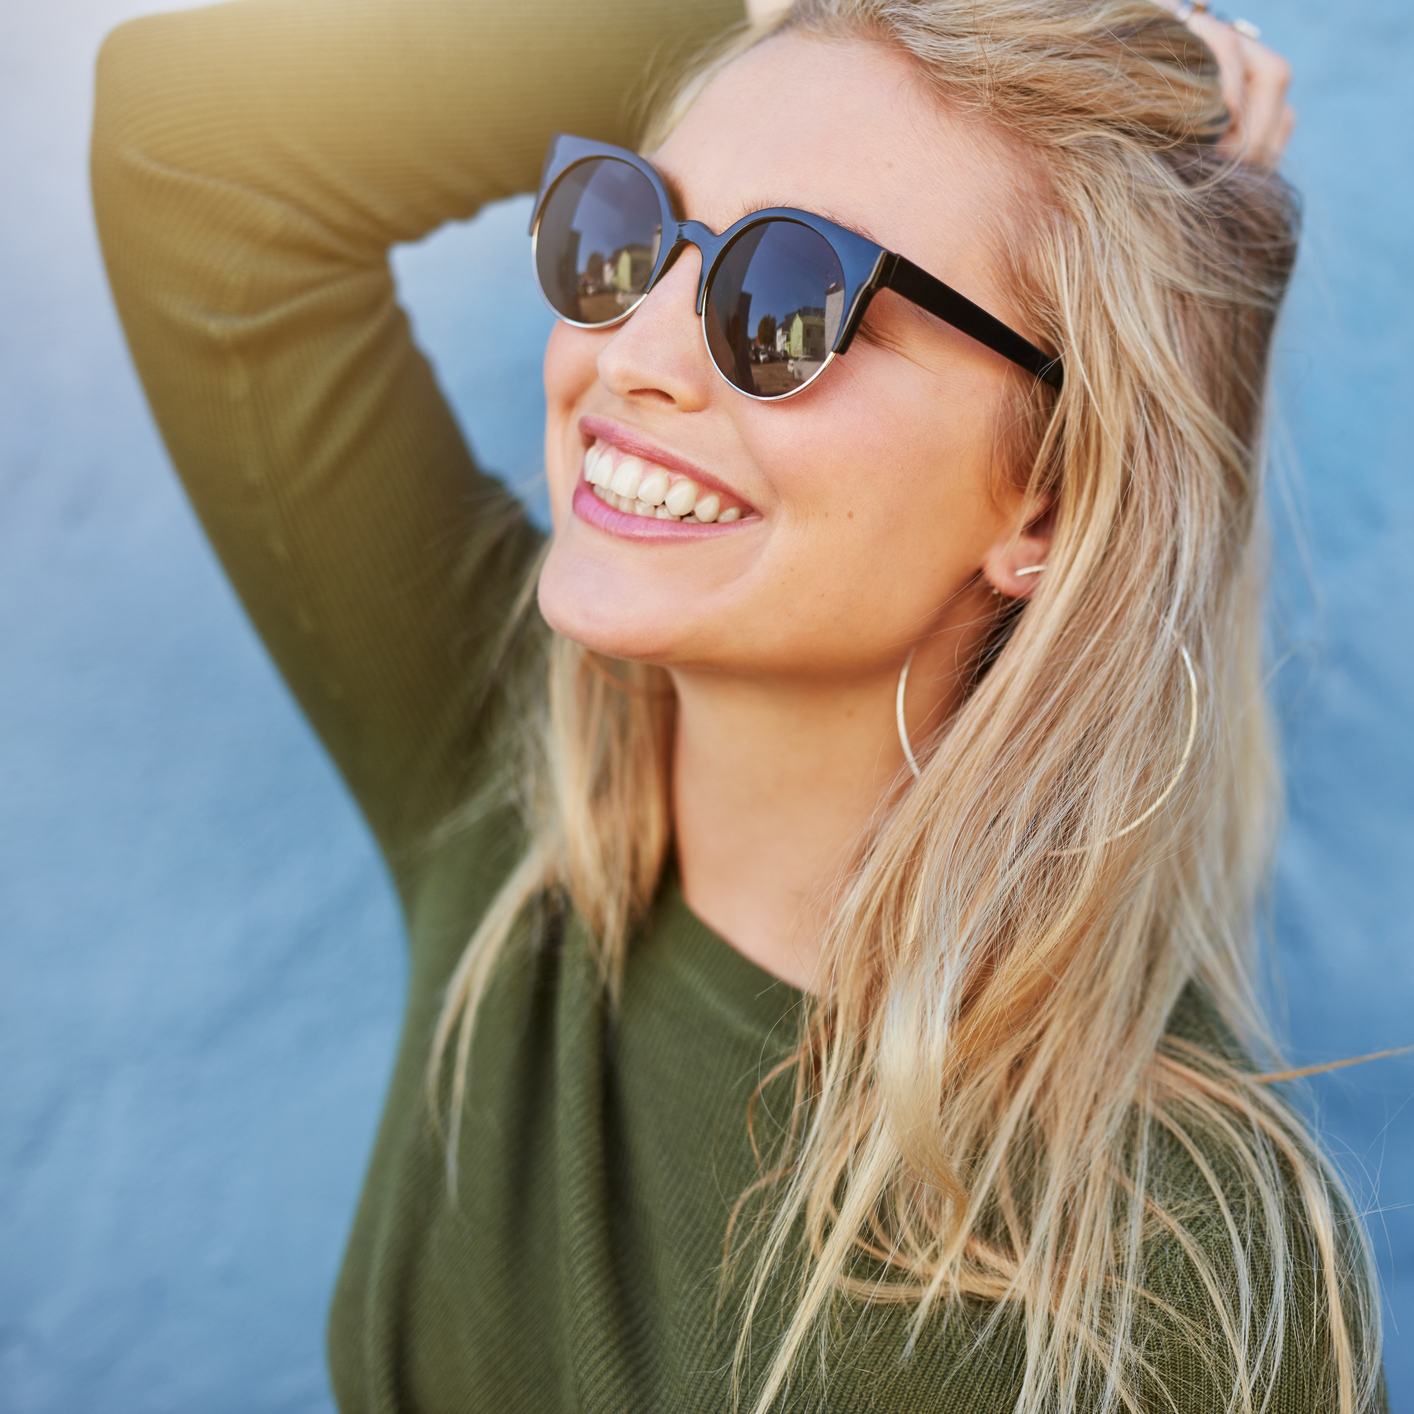 A woman wearing sunglasses, smiling.